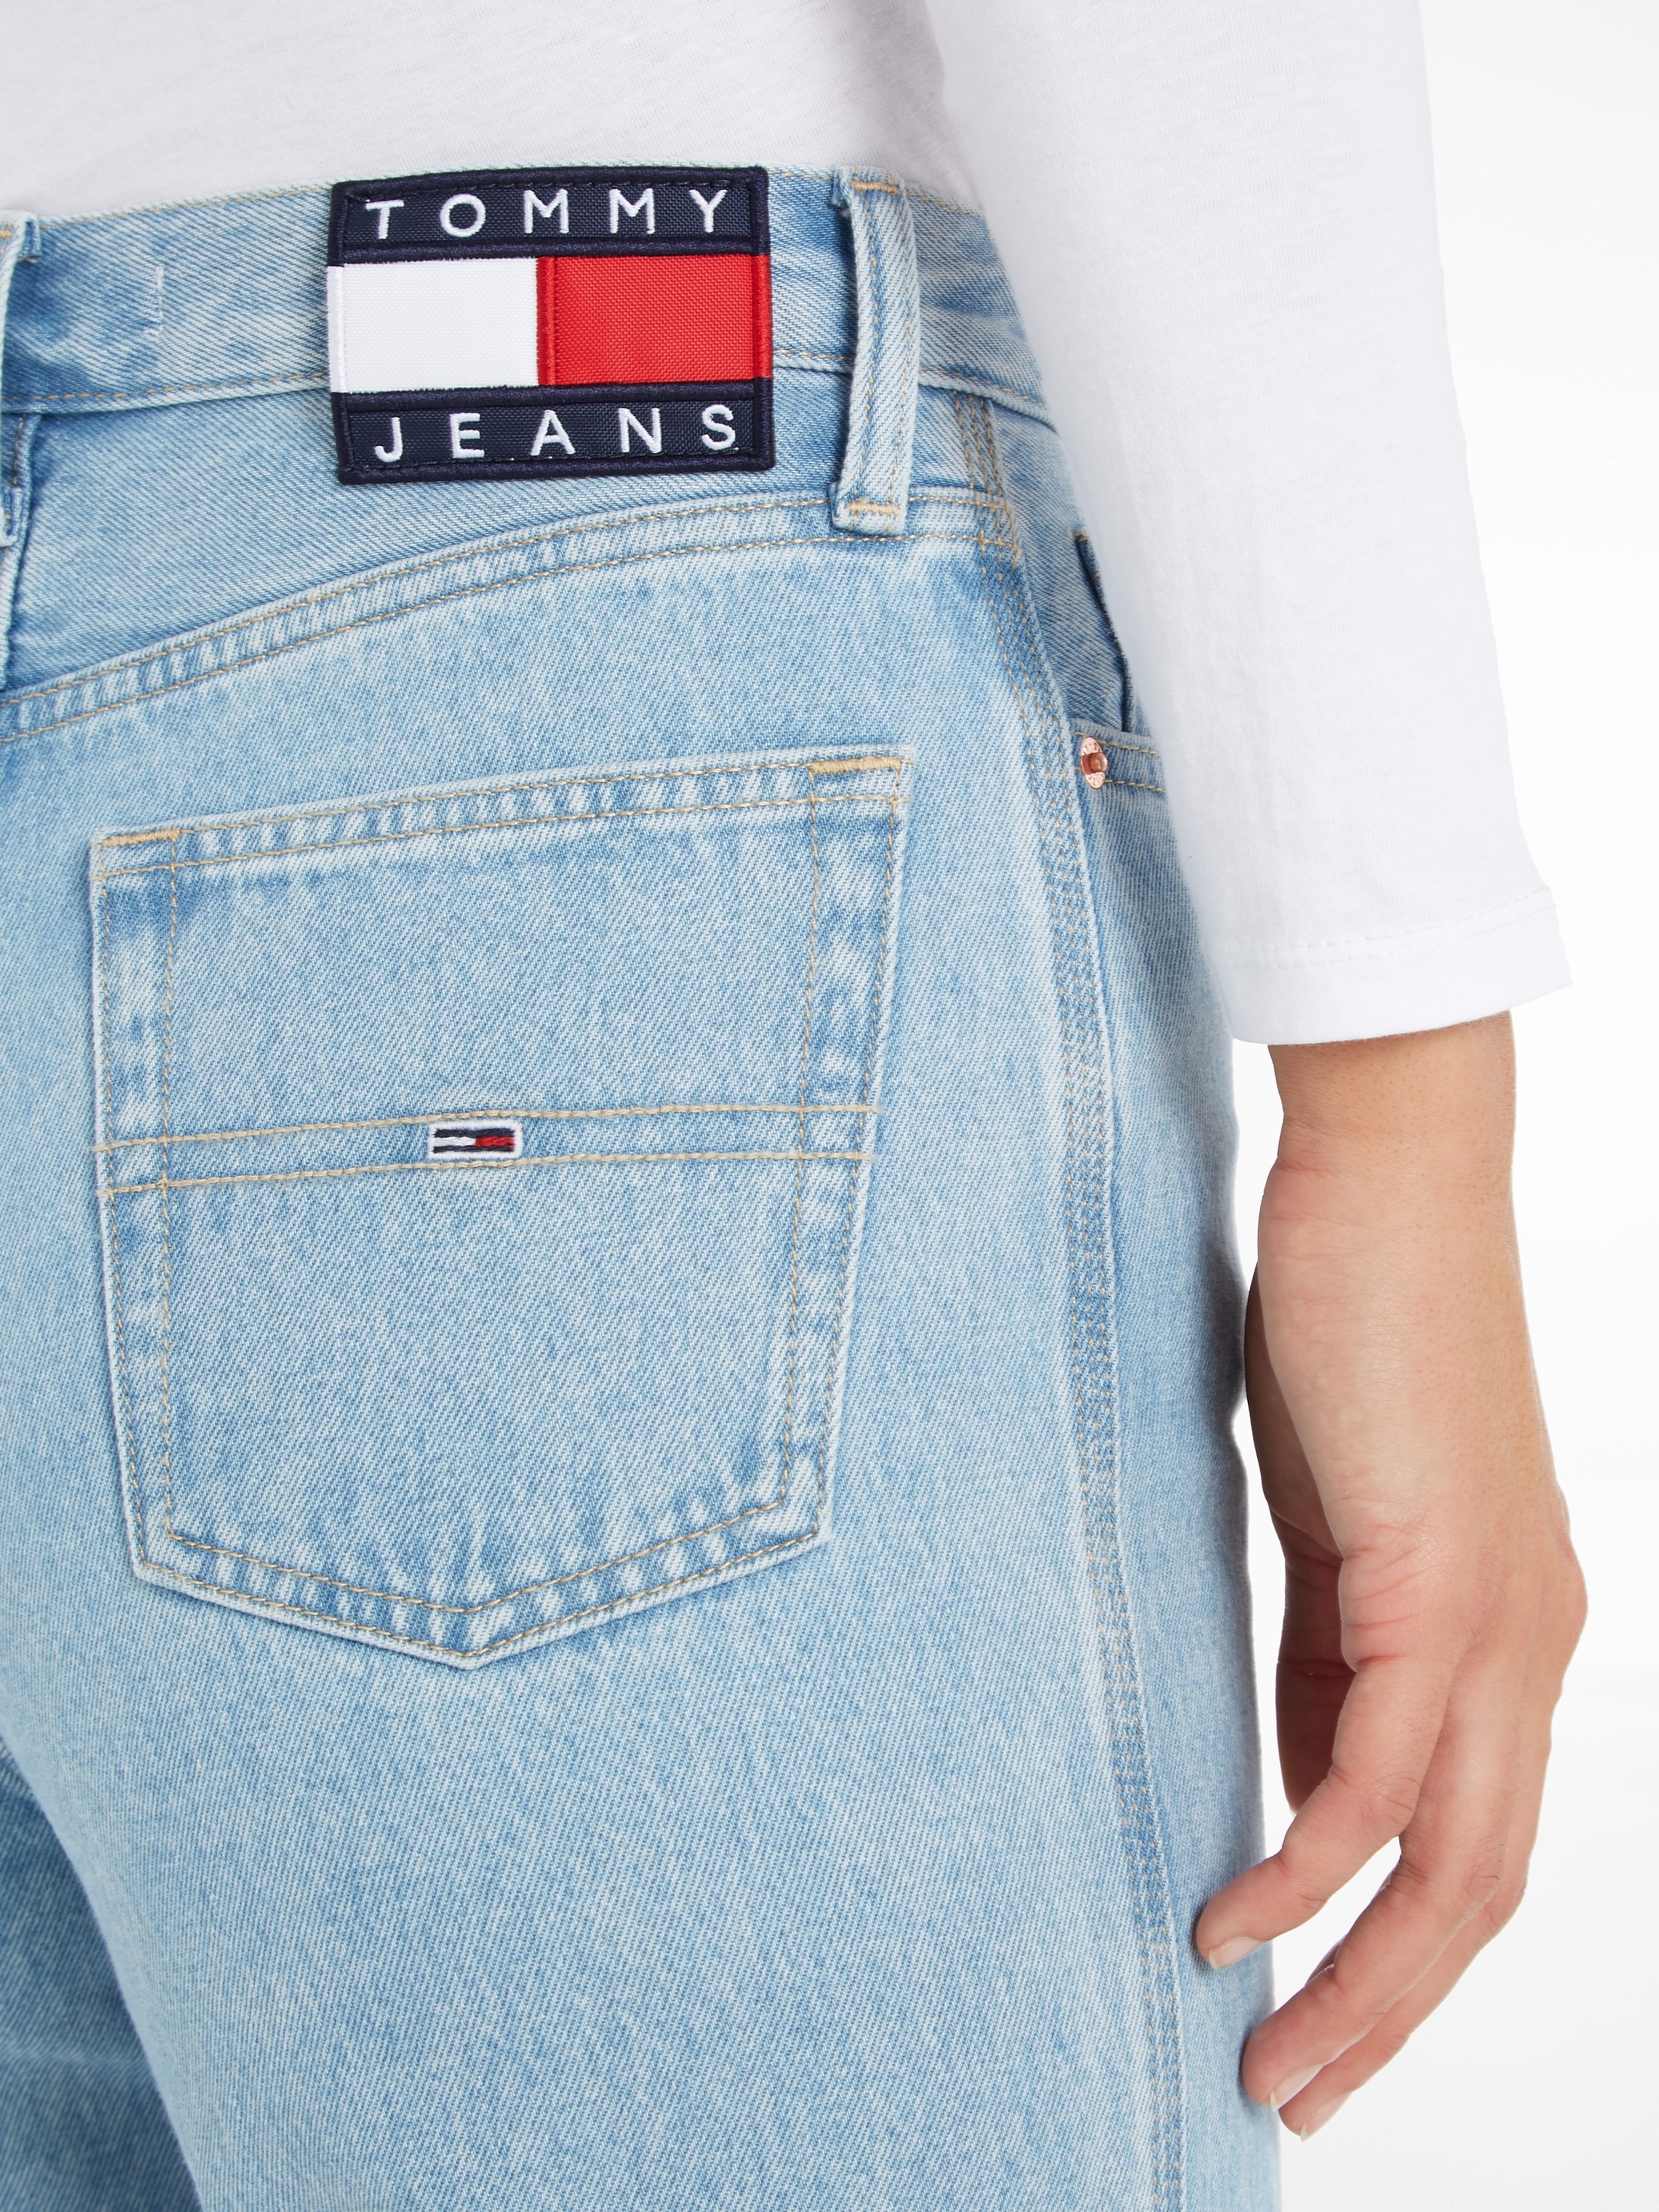 mit Jeans, bei Jeans Logobadges OTTO Weite Tommy Jeans online Tommy